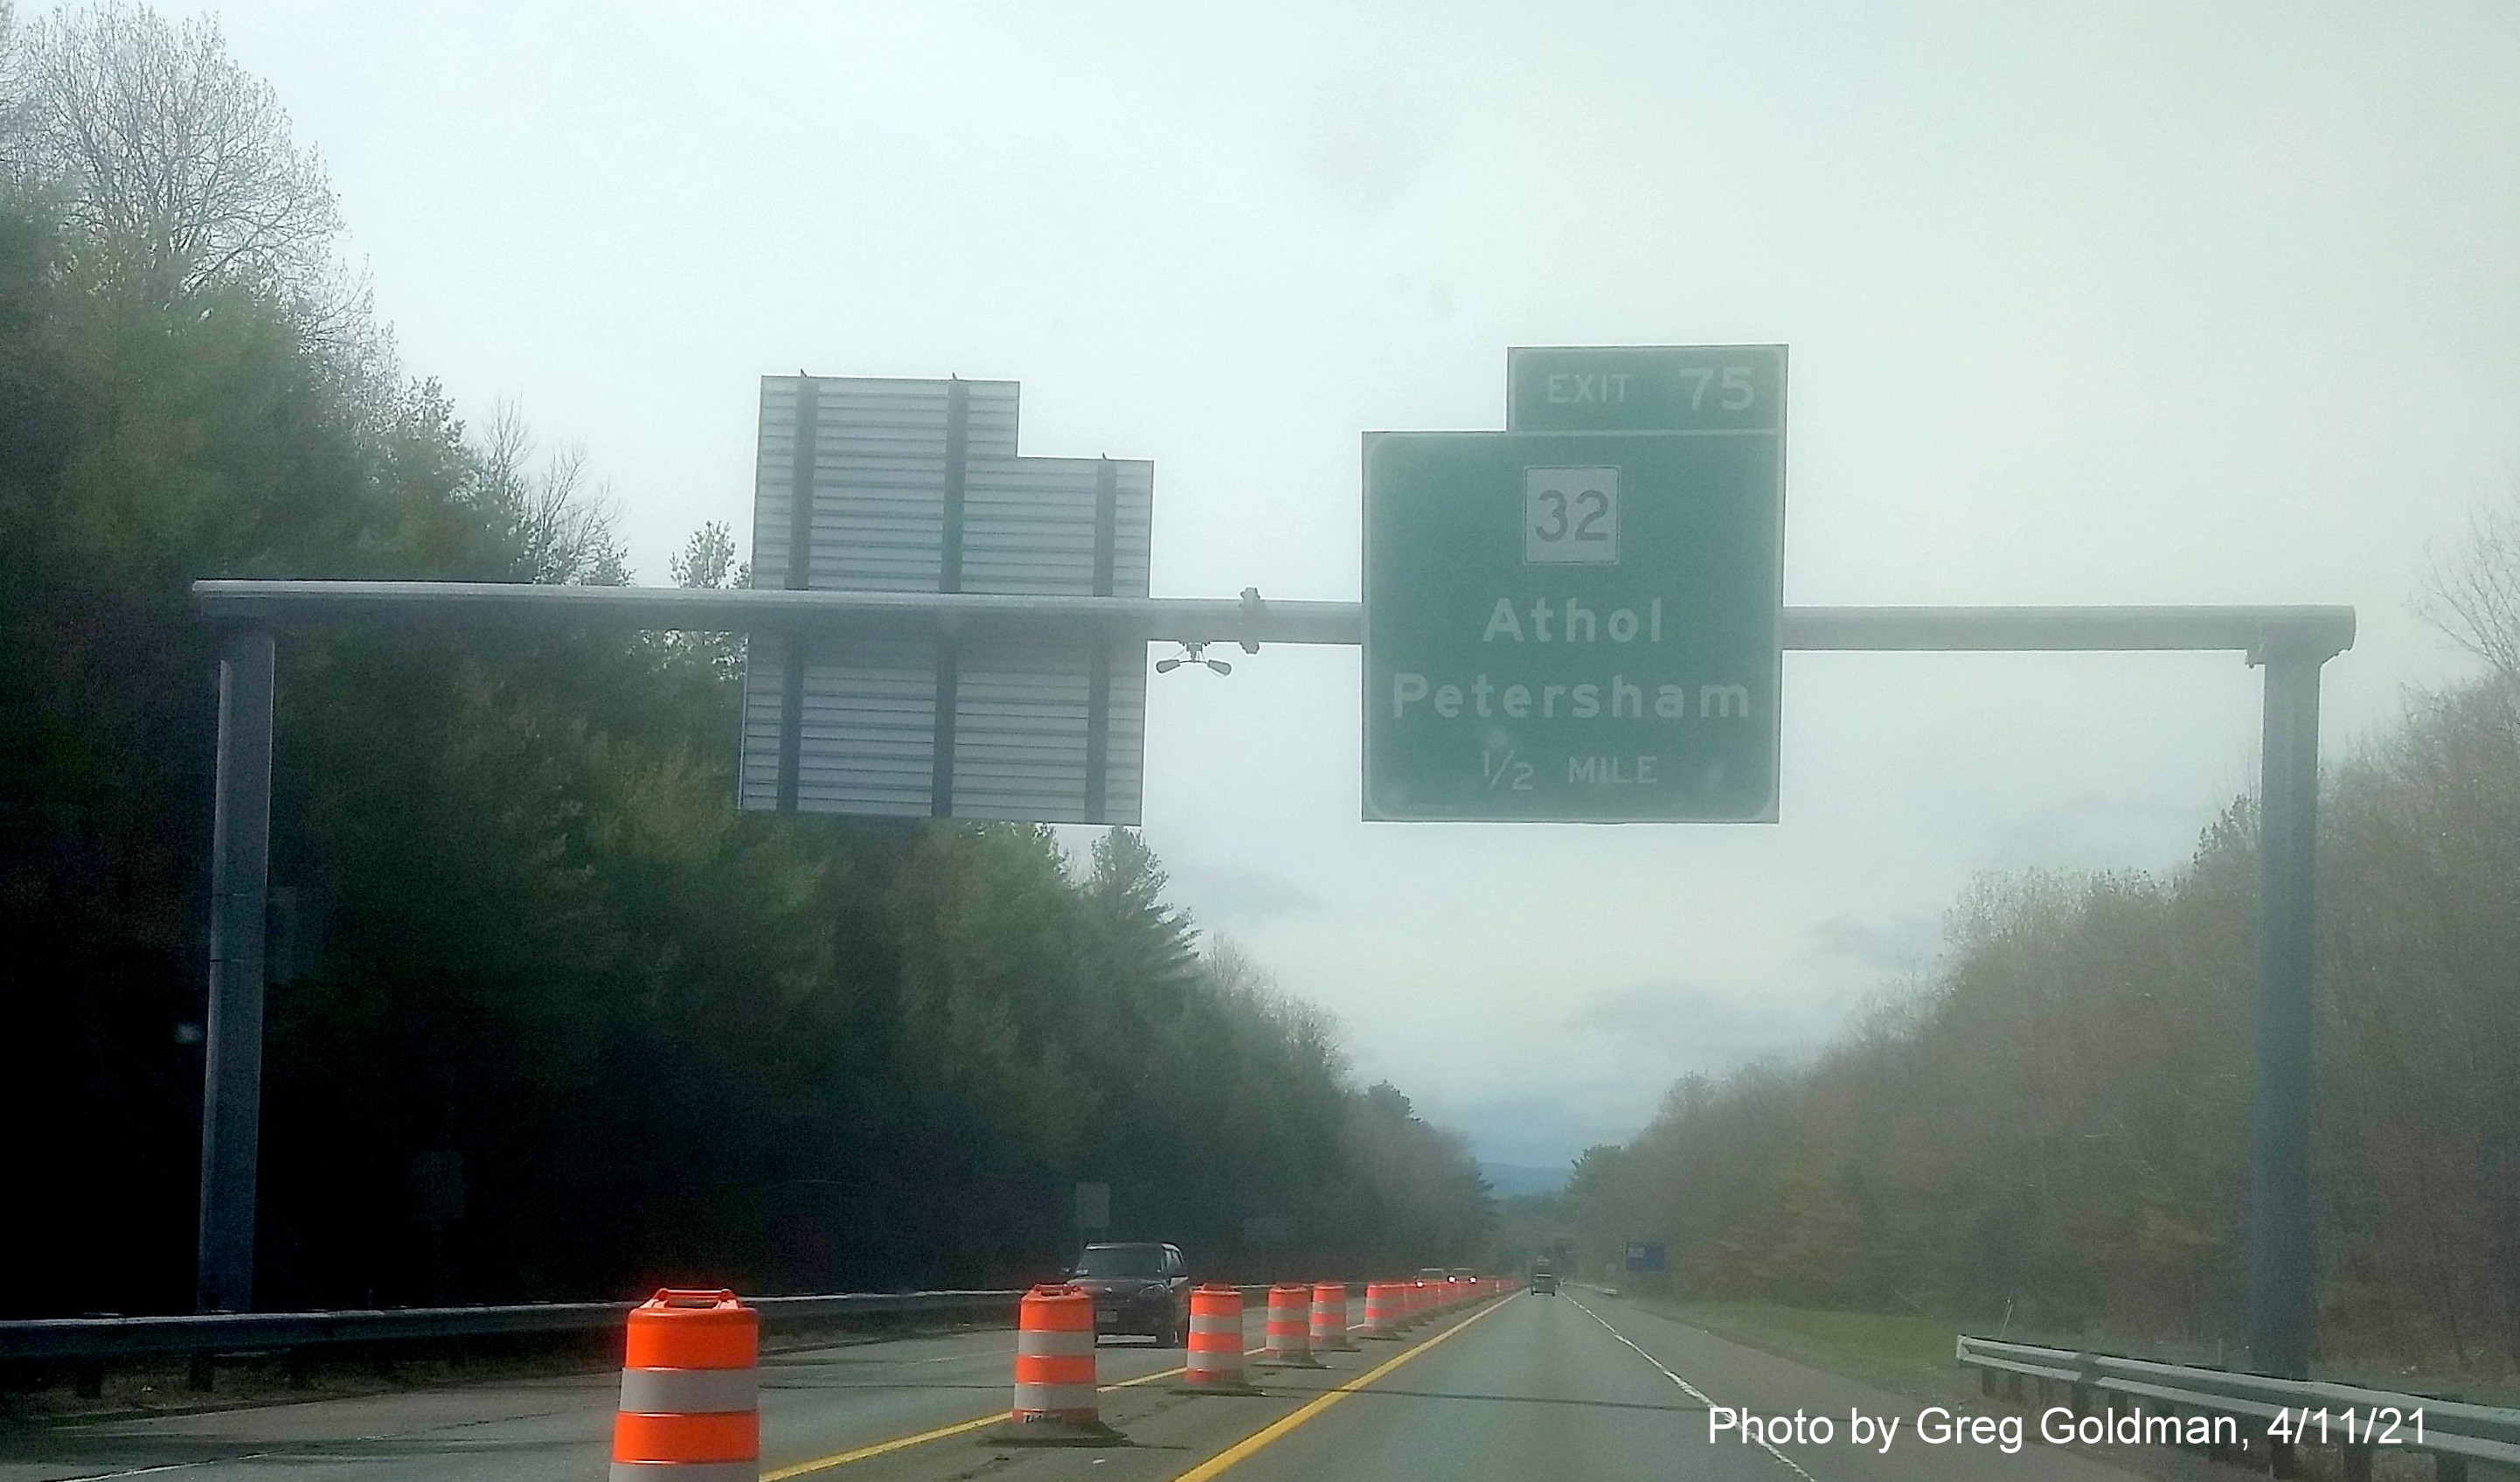 Image of 1/2 Mile advance sign for MA 32 exit with new milepost based exit number on MA 2 West in Athol, by Greg Goldman, April 2021